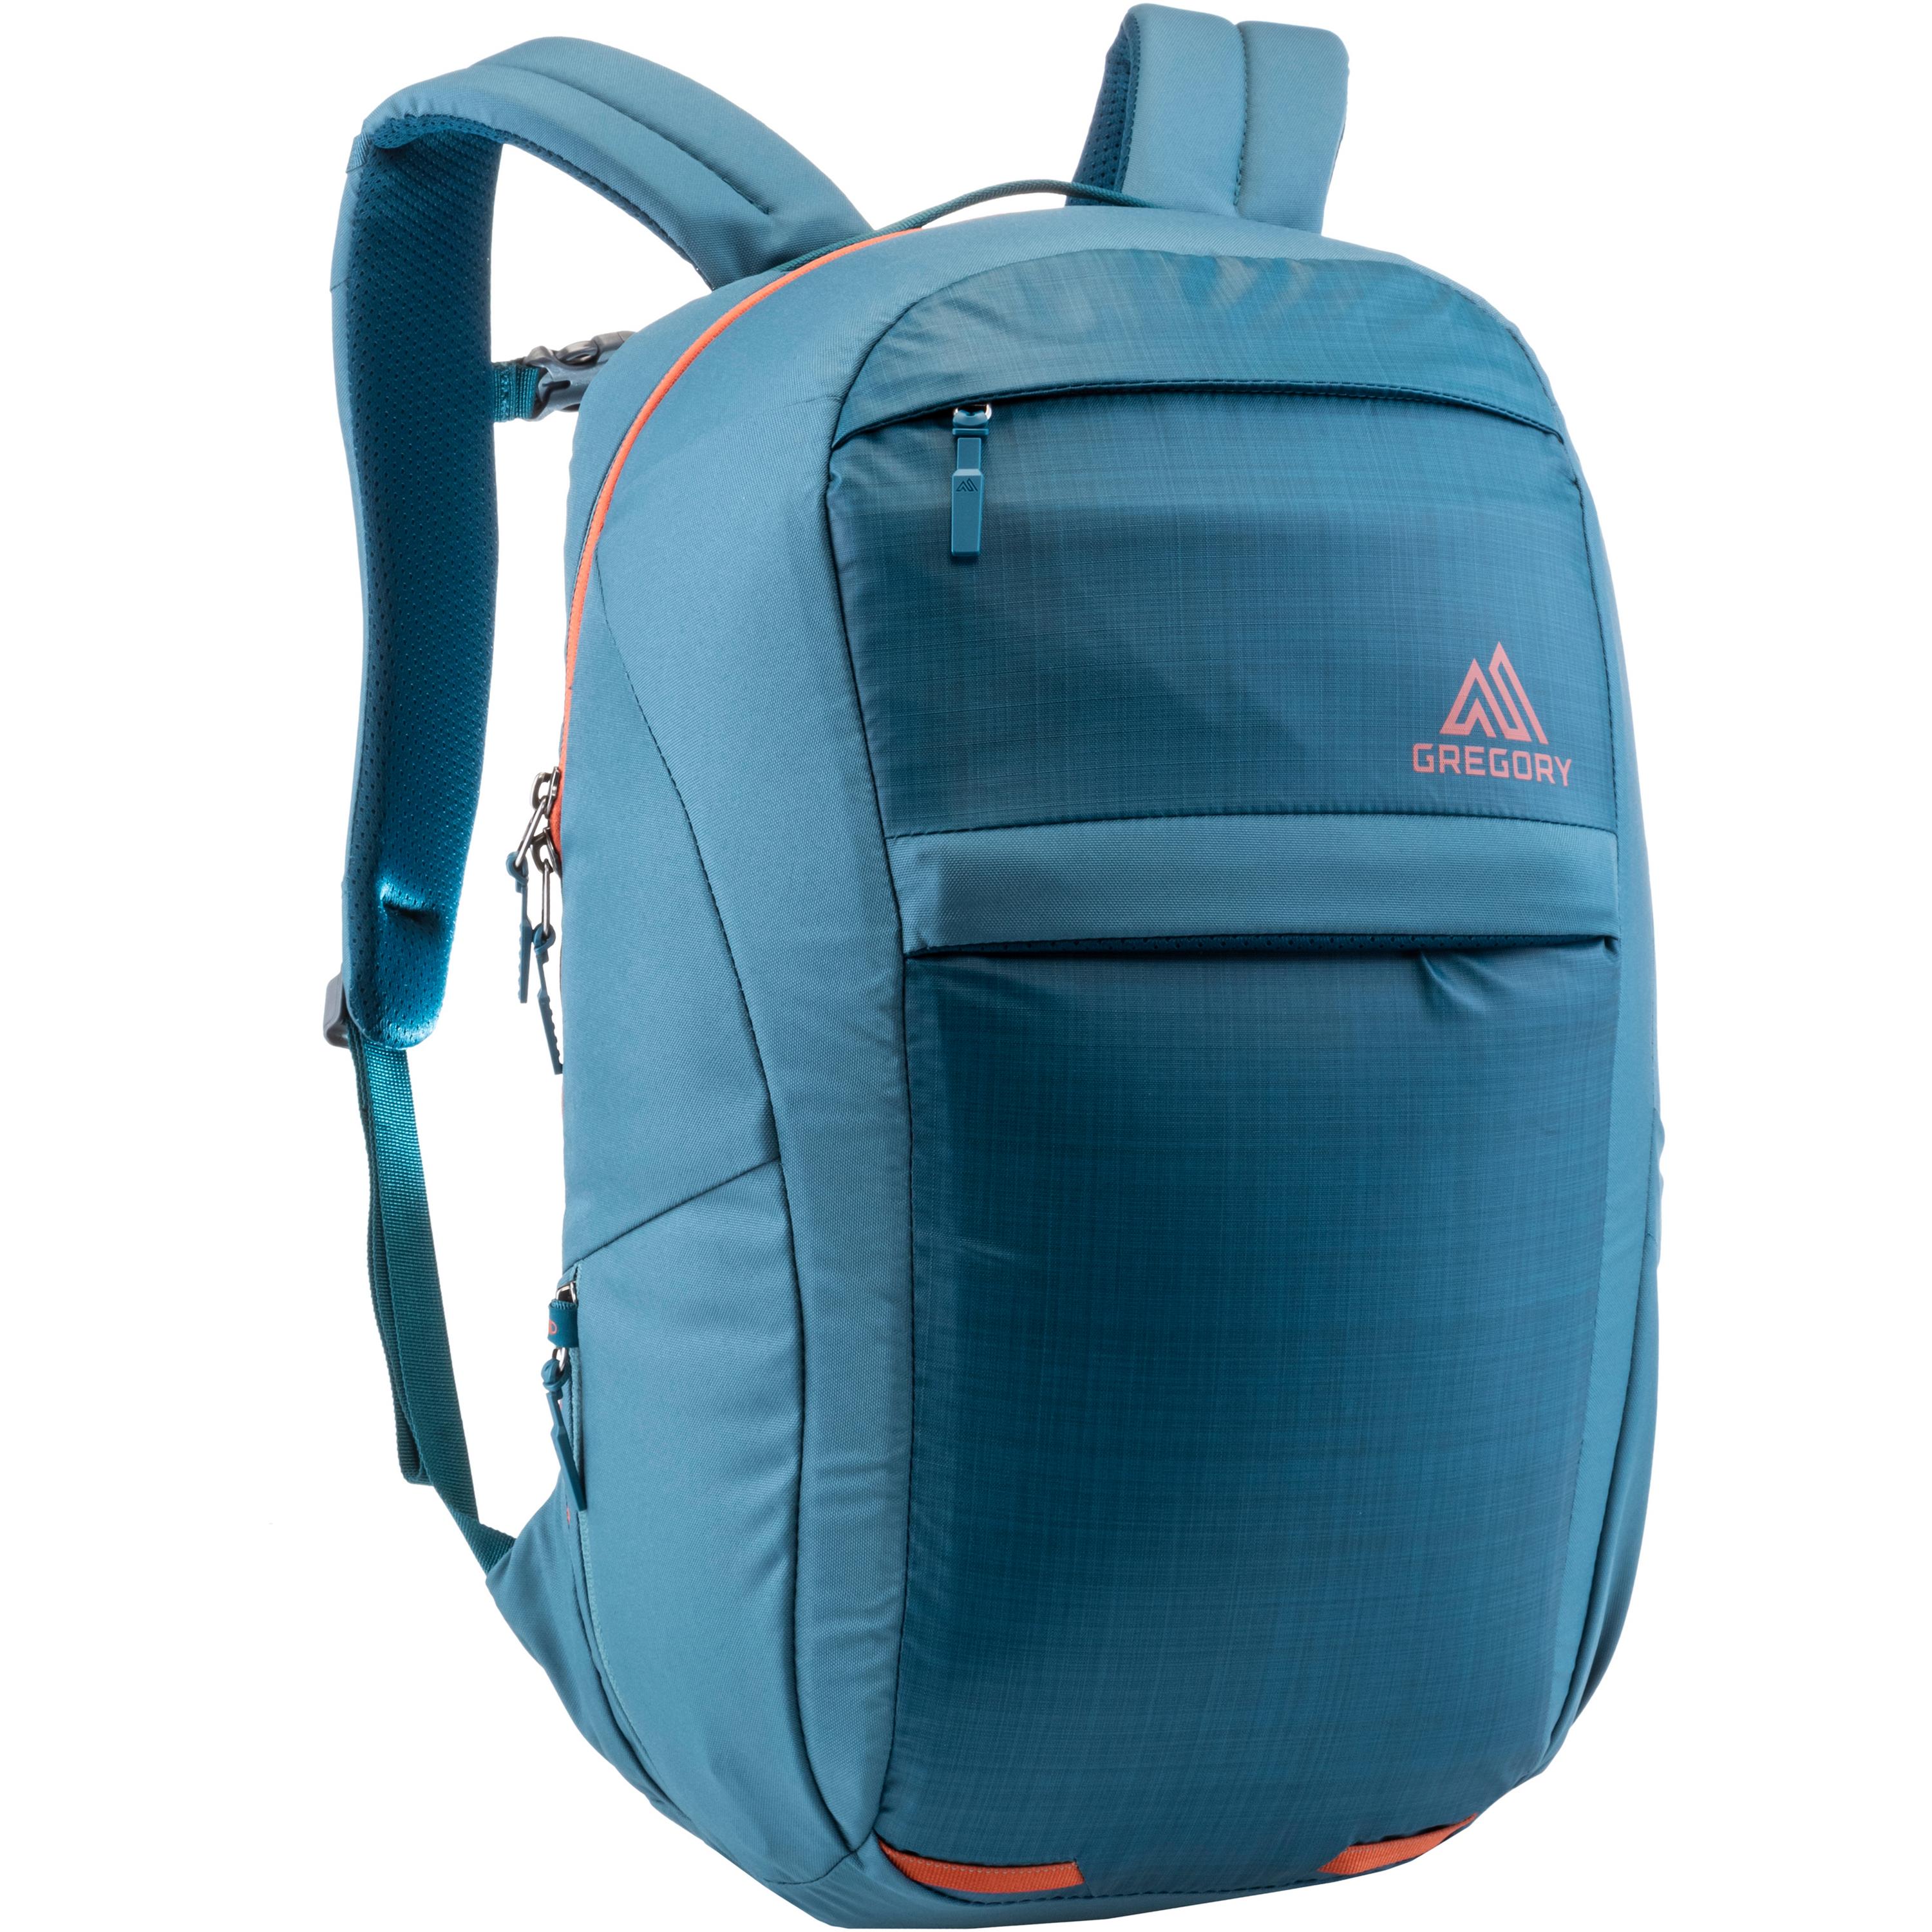 Image of Gregory RESIN 24 Daypack